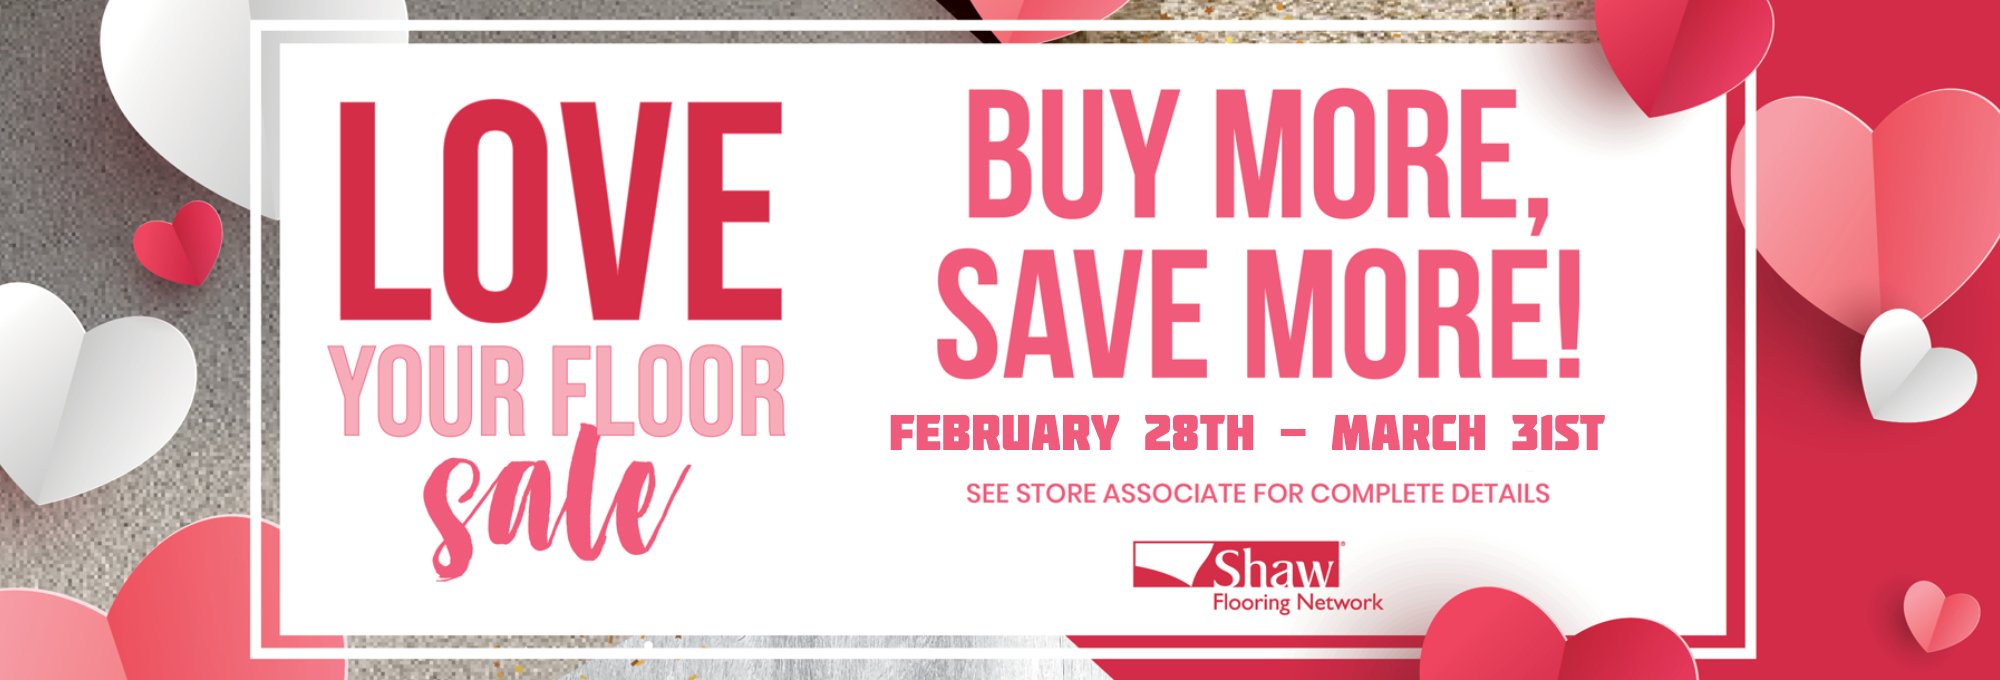 Shaw Floors "Love Your Floors Sale" Valid From Feb 28th - March 31st